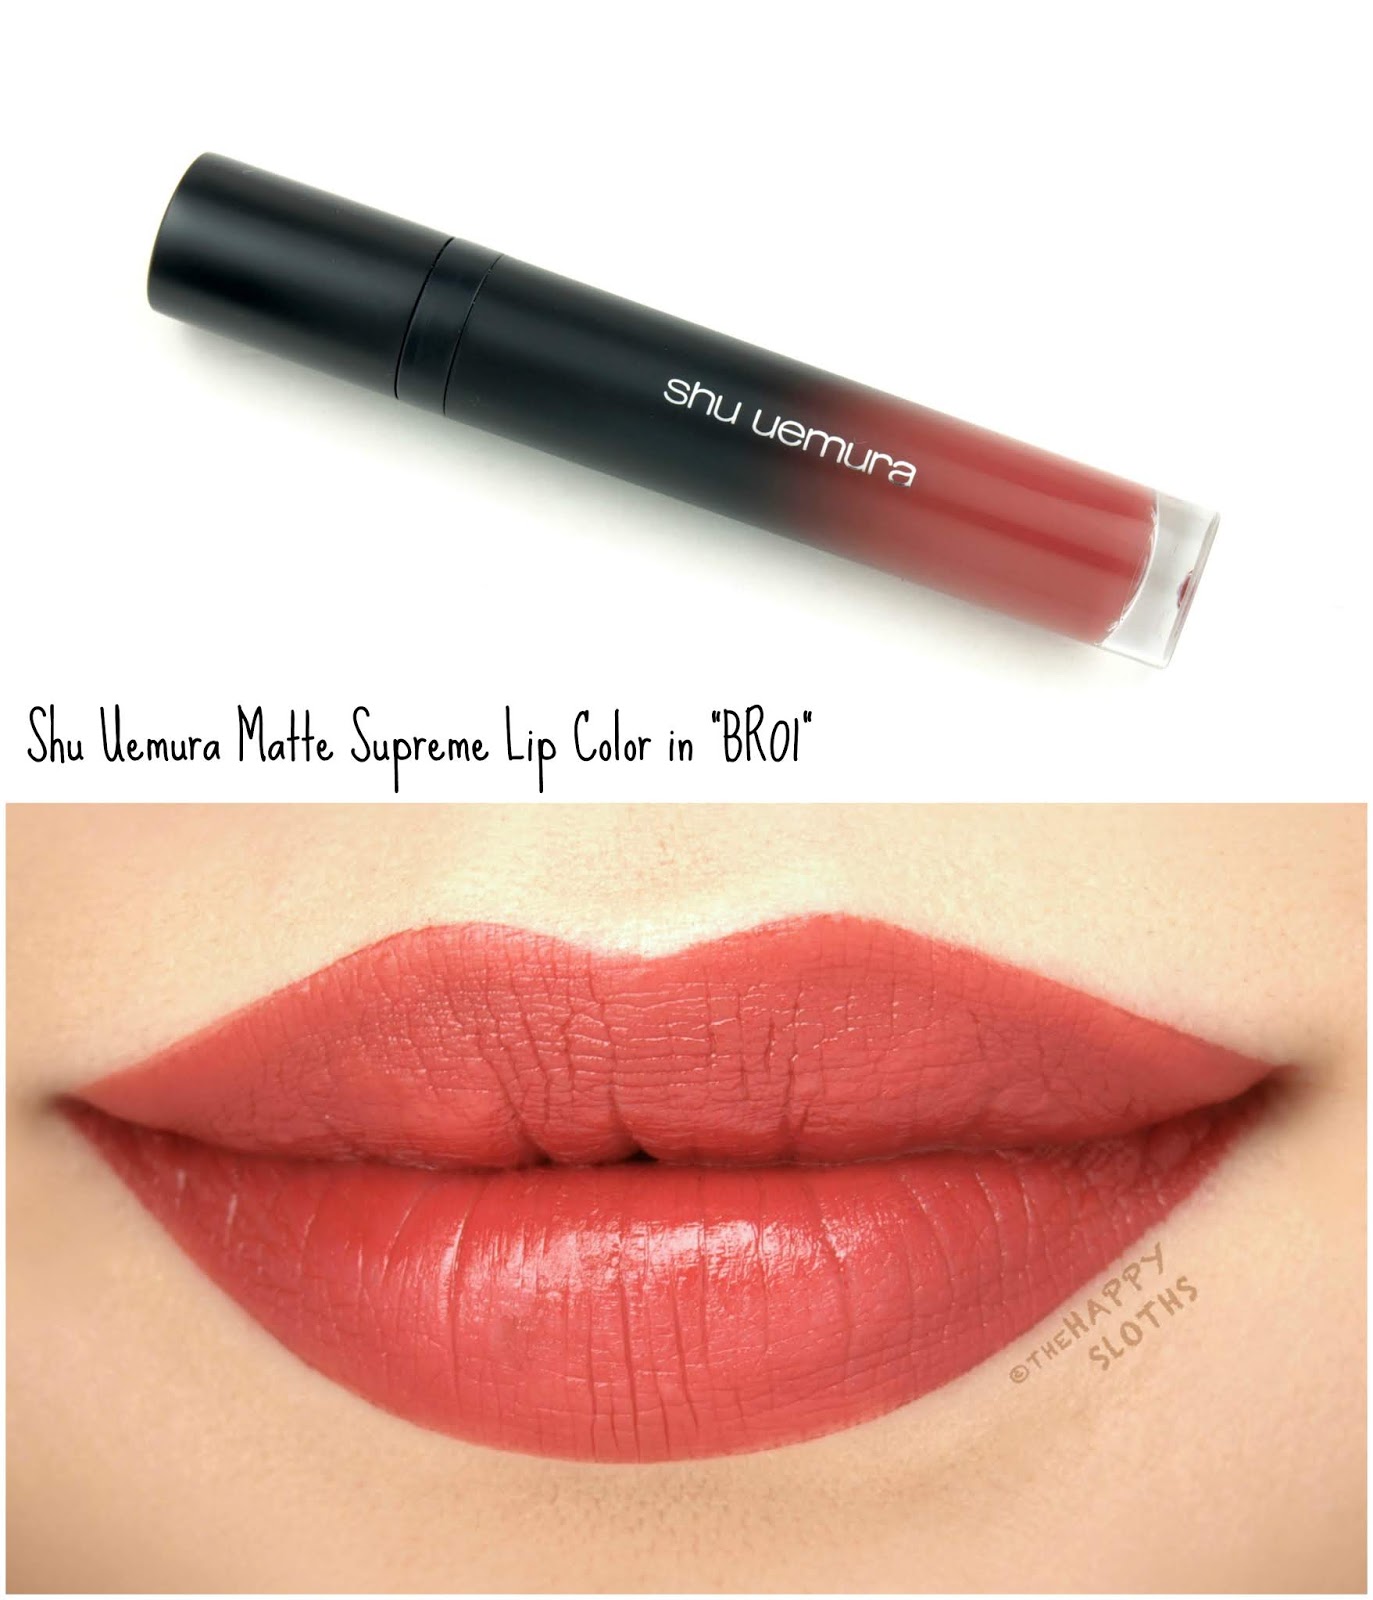 Shu Uemura | Matte Supreme Lip Color in "BR 01": Review and Swatches